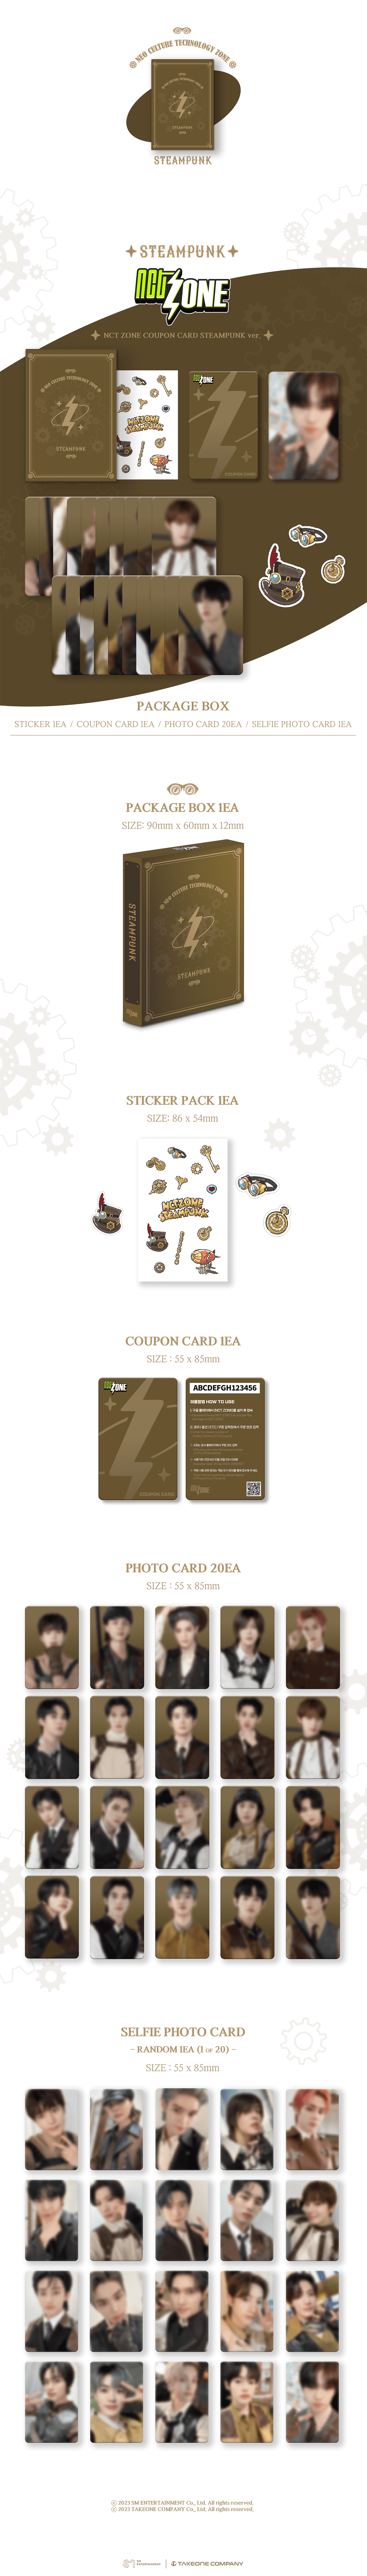 NCT ZONE Coupon Card (STEAMPUNK Version)